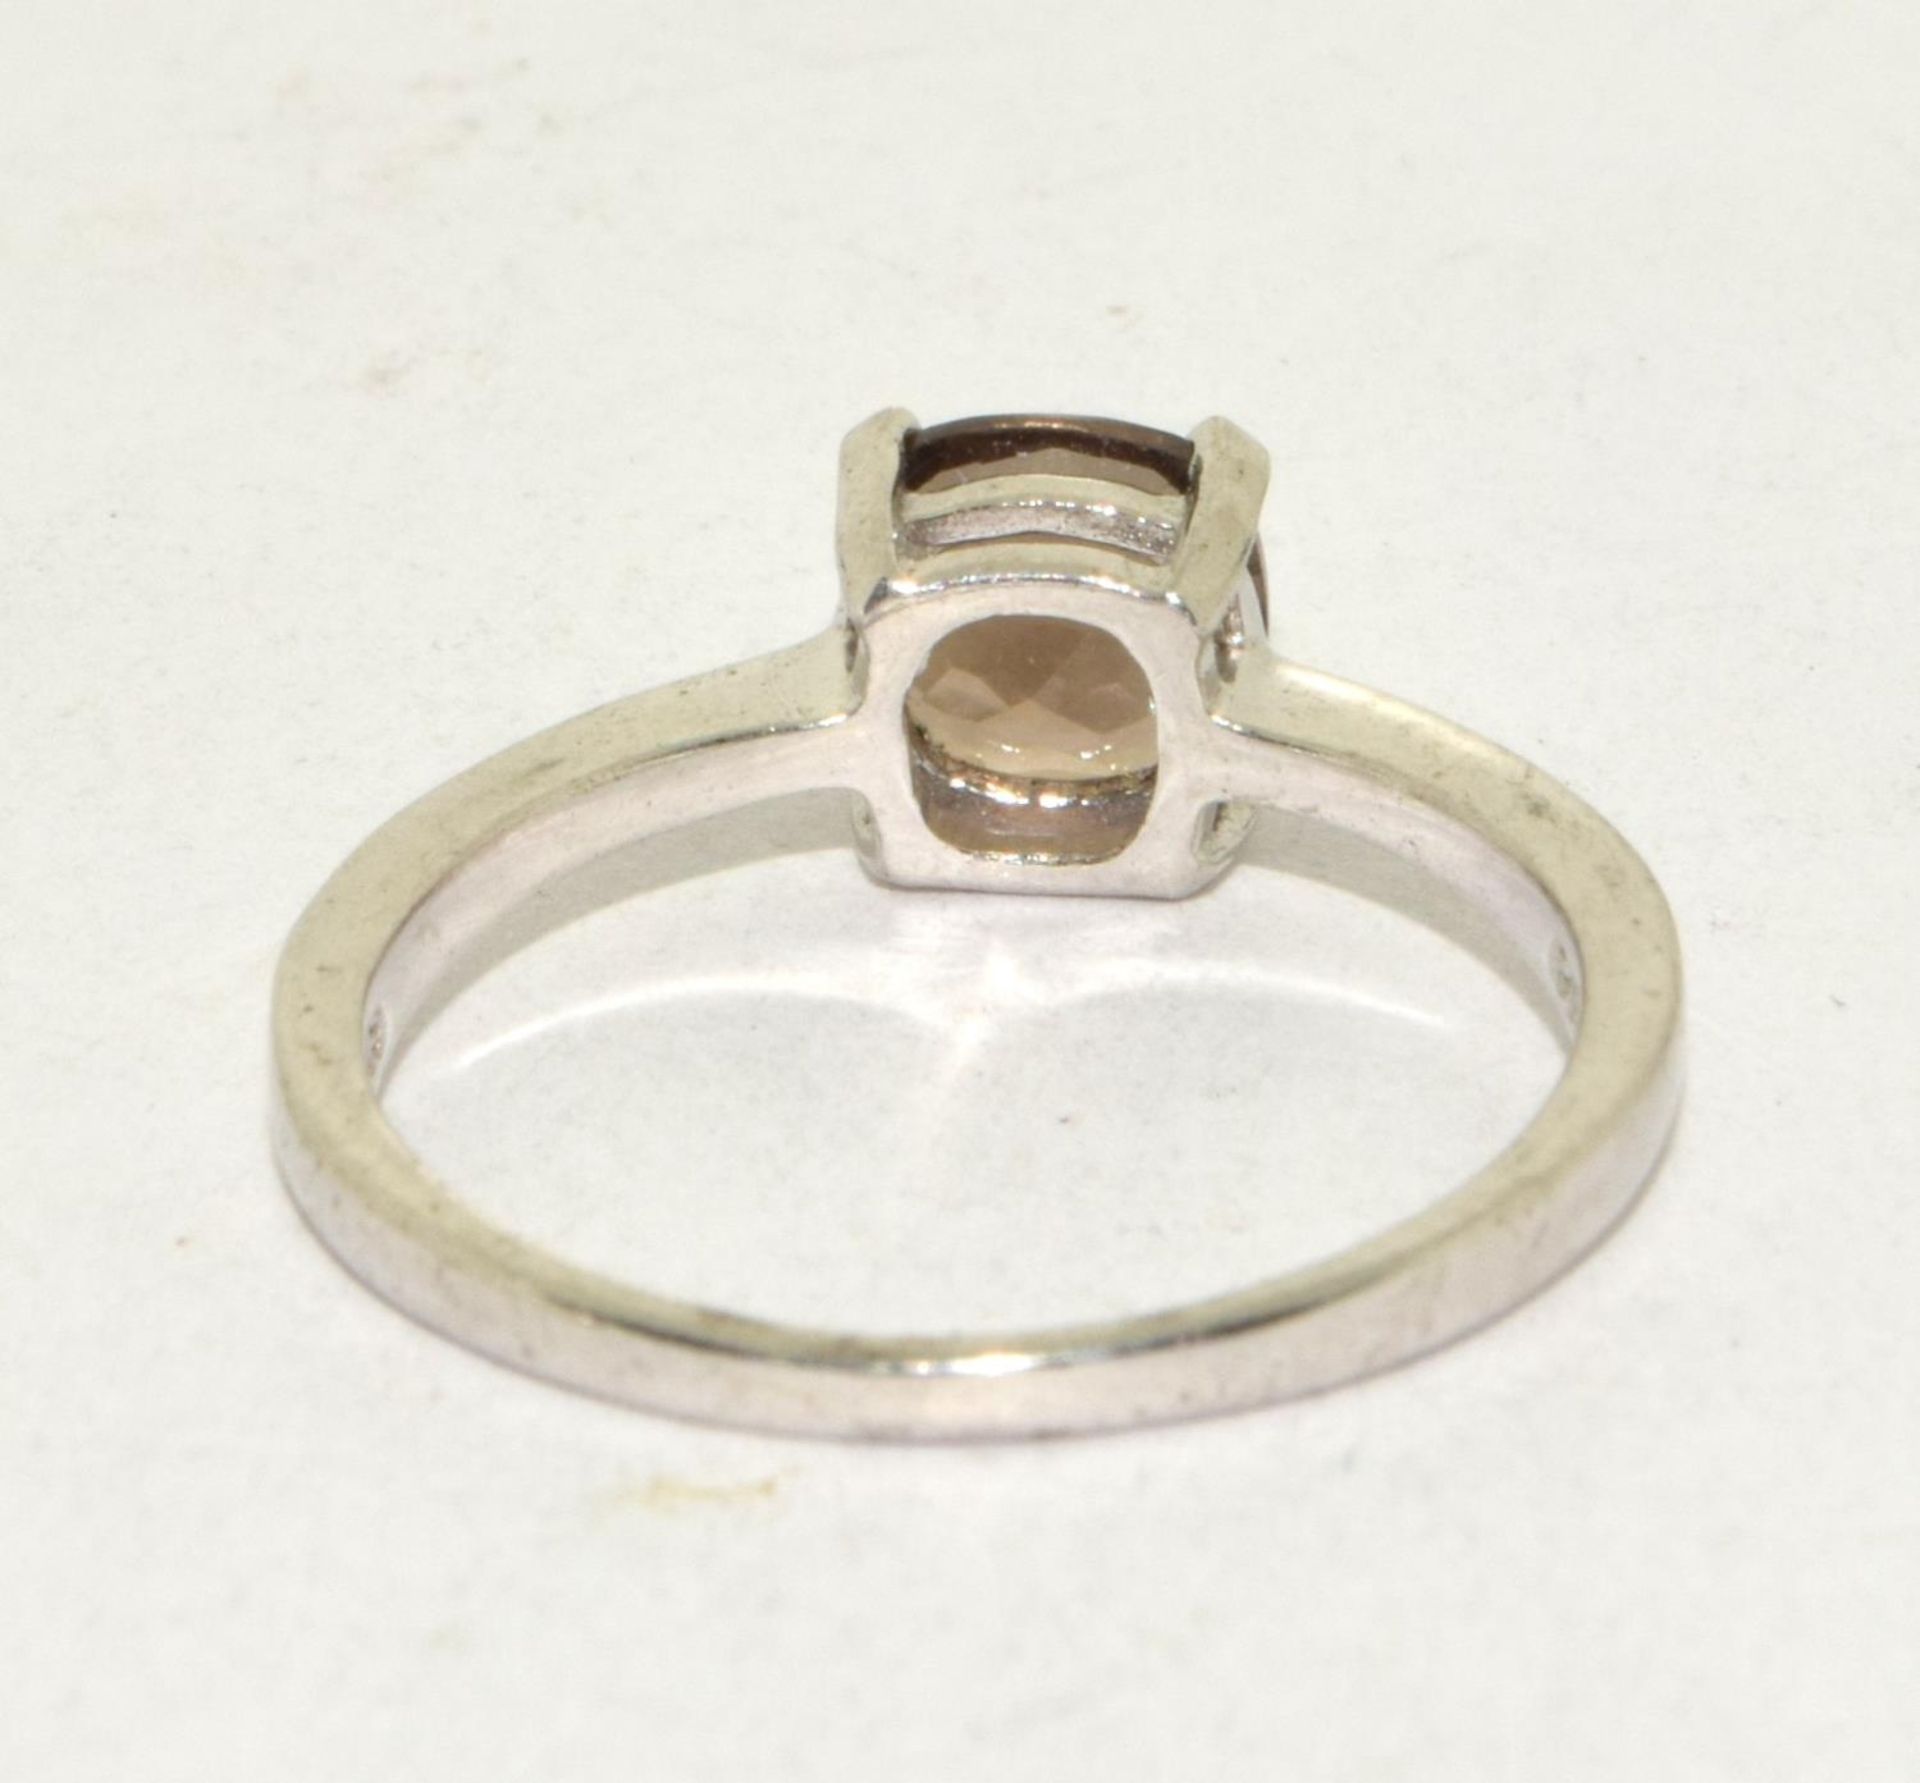 A w/g 925 silver smokey quartz solitaire ring Size R 1/2. - Image 3 of 3